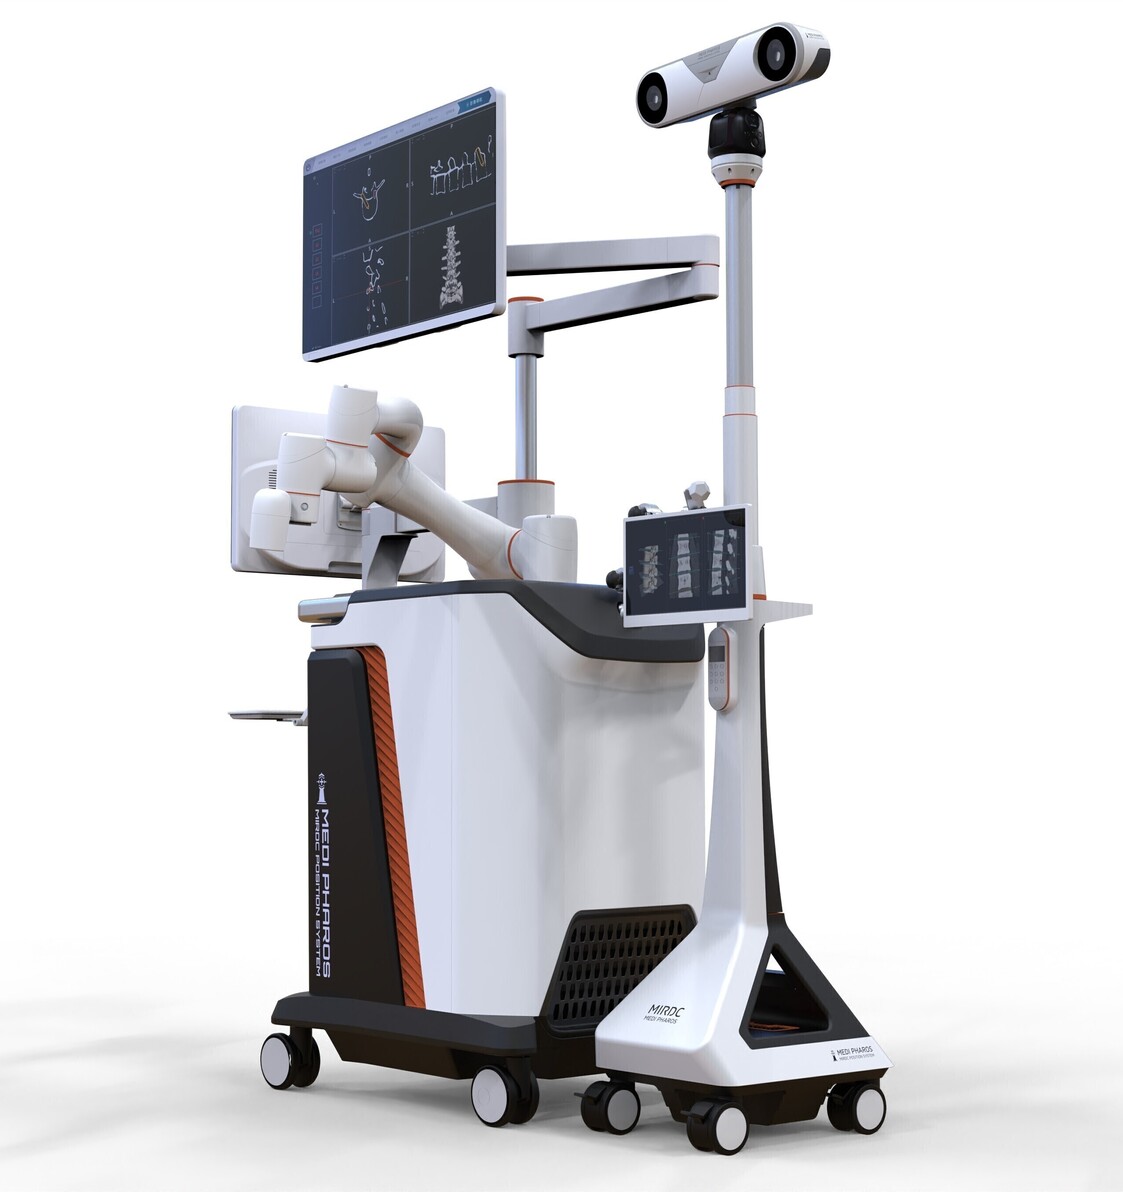 Smart spine surgery assistance system-2